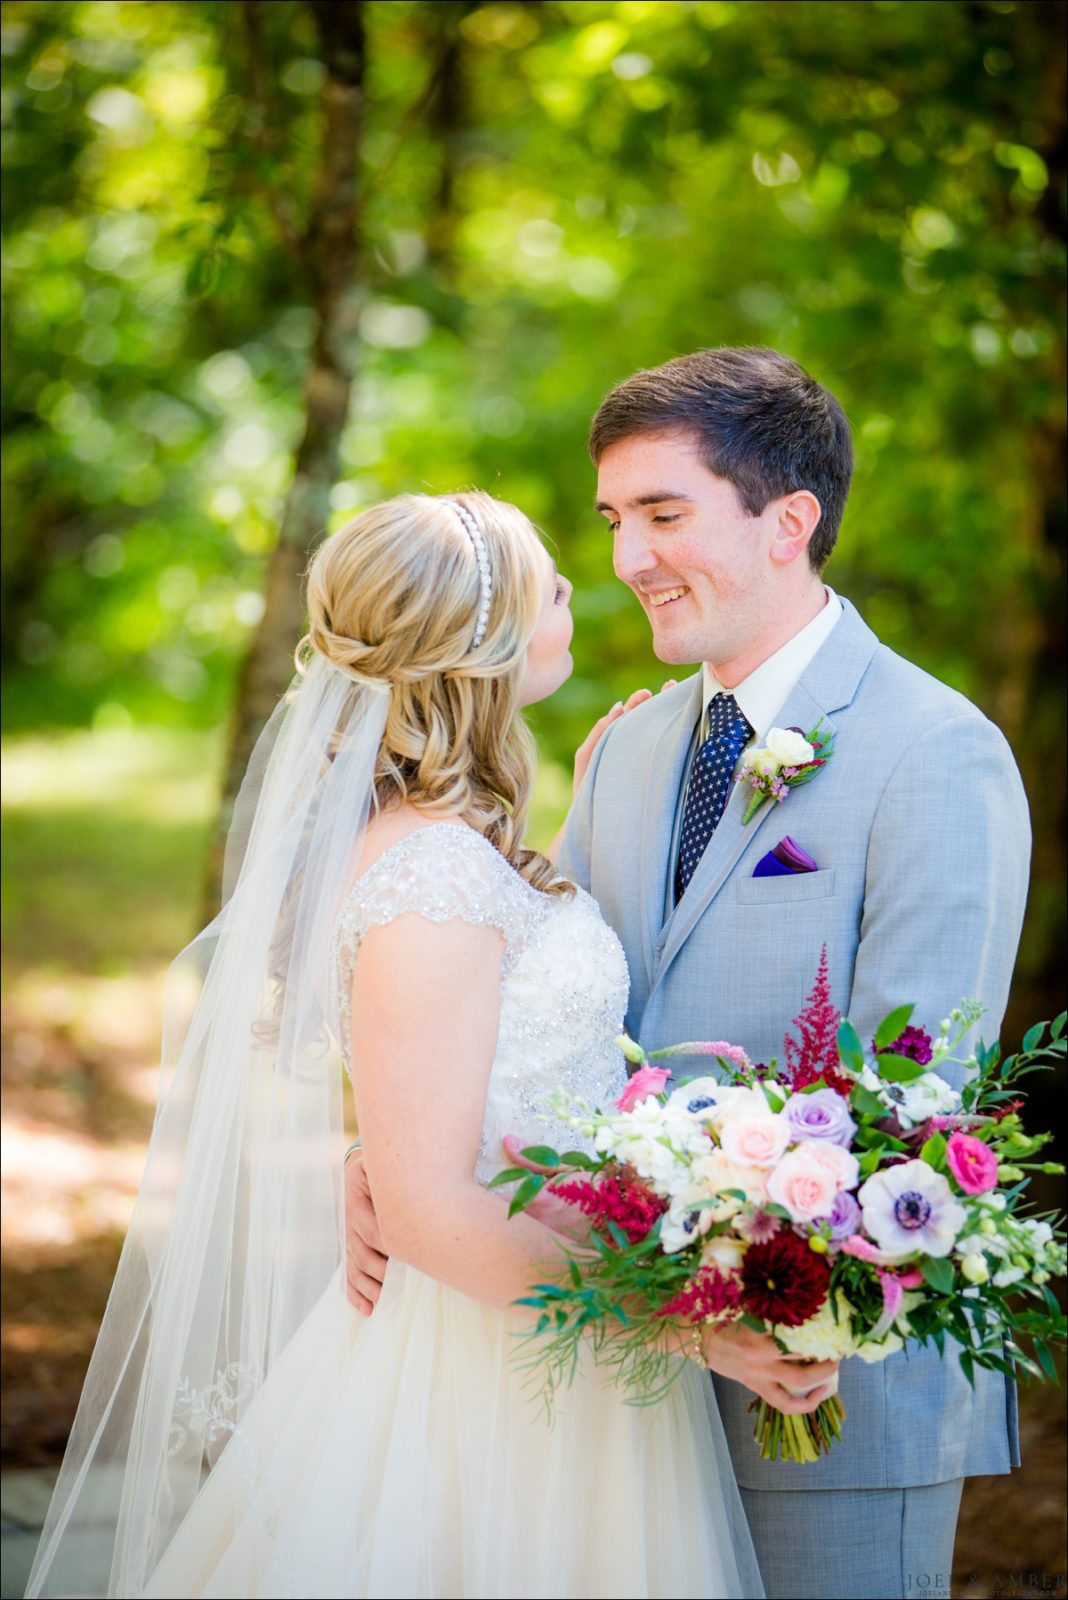 Marissa & Jared // Lilac and Dusty Rose October Wedding | Joel and ...